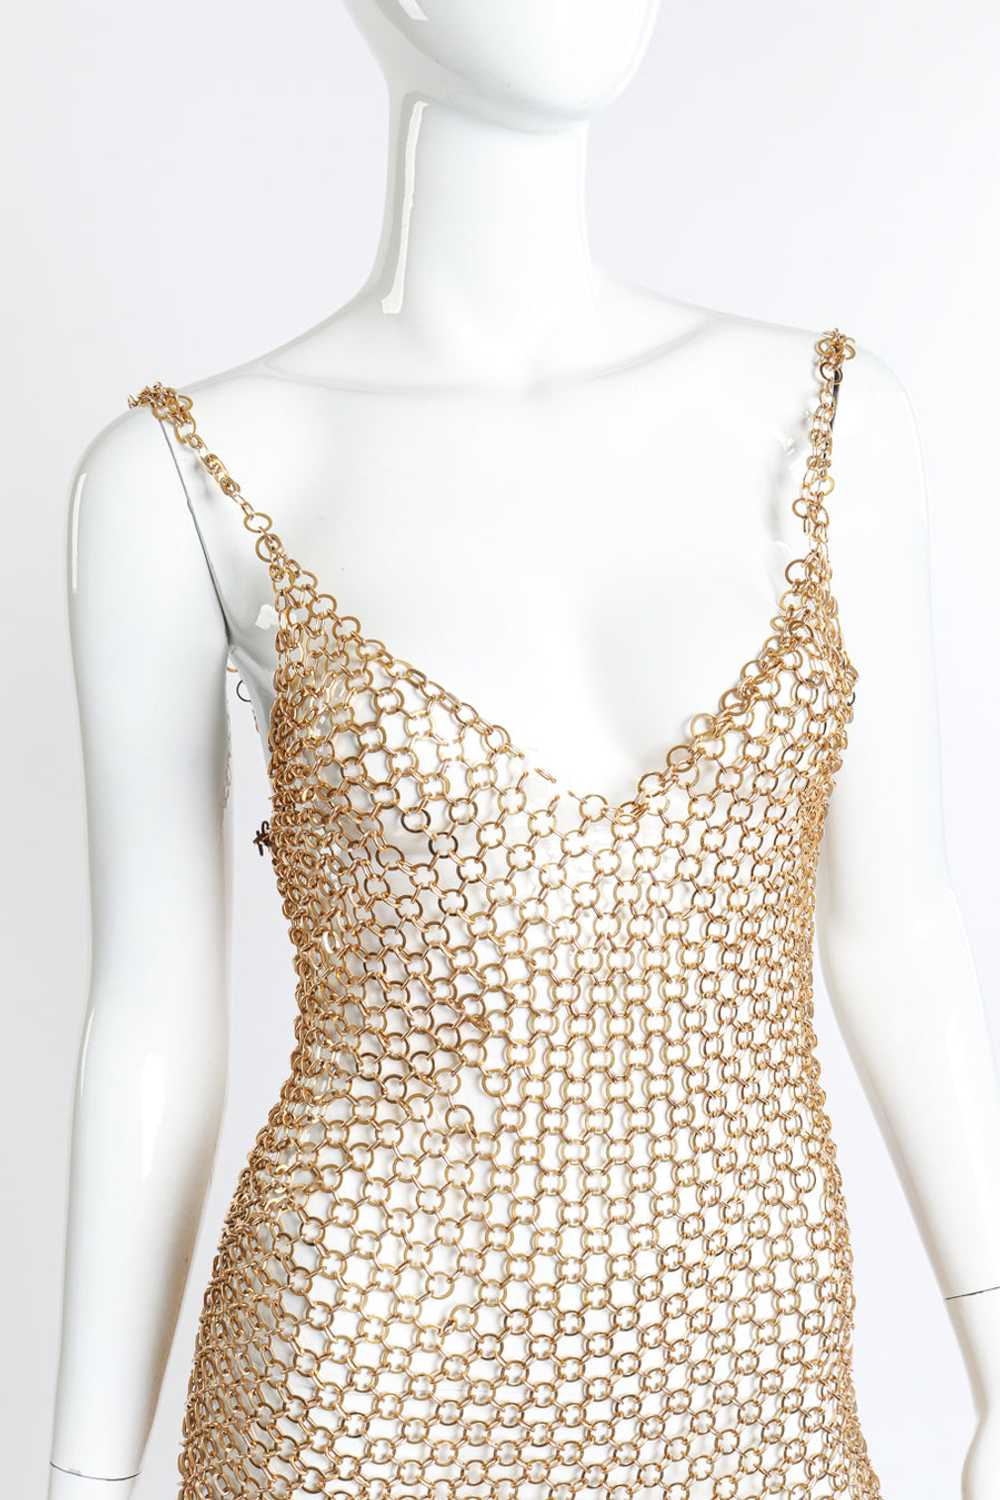 Ring Link Chain Dress - image 4